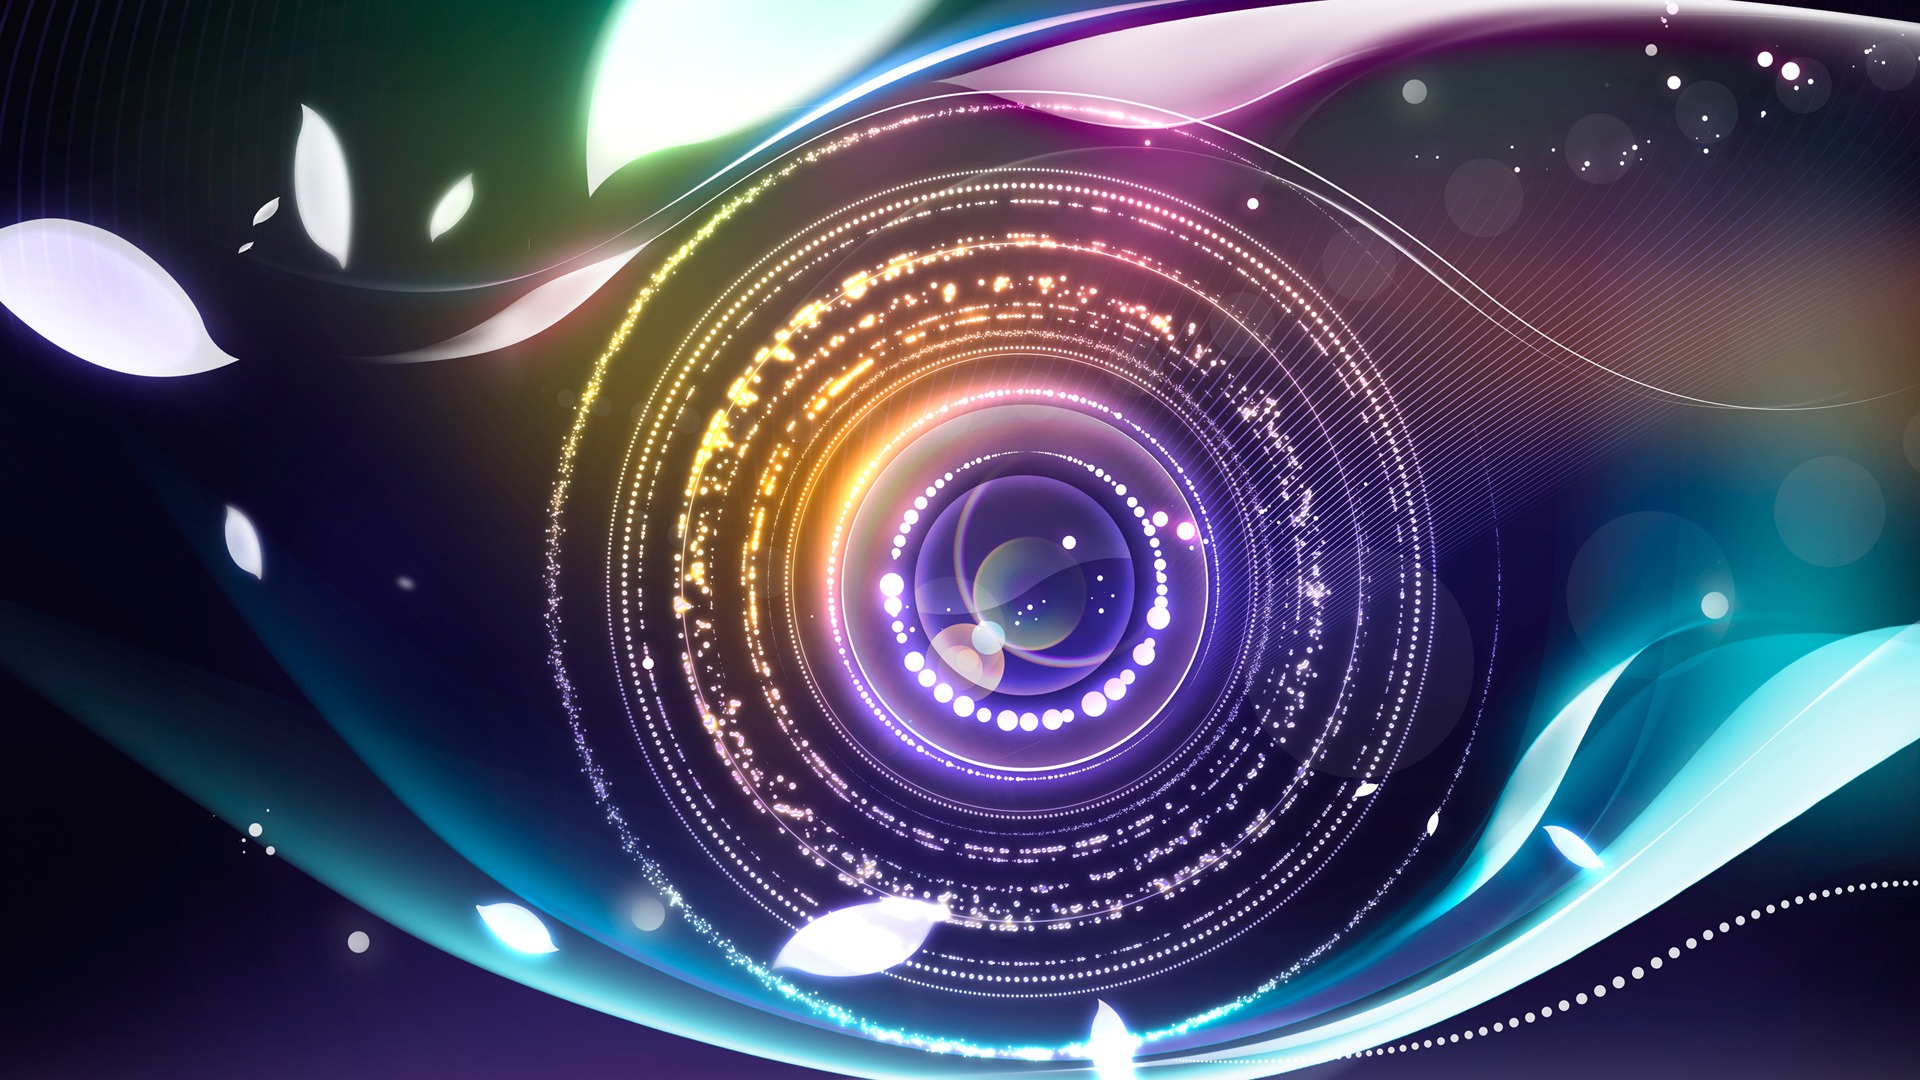 Ojo Hermoso Wallpaper Abstract 3d In Jpg Format For